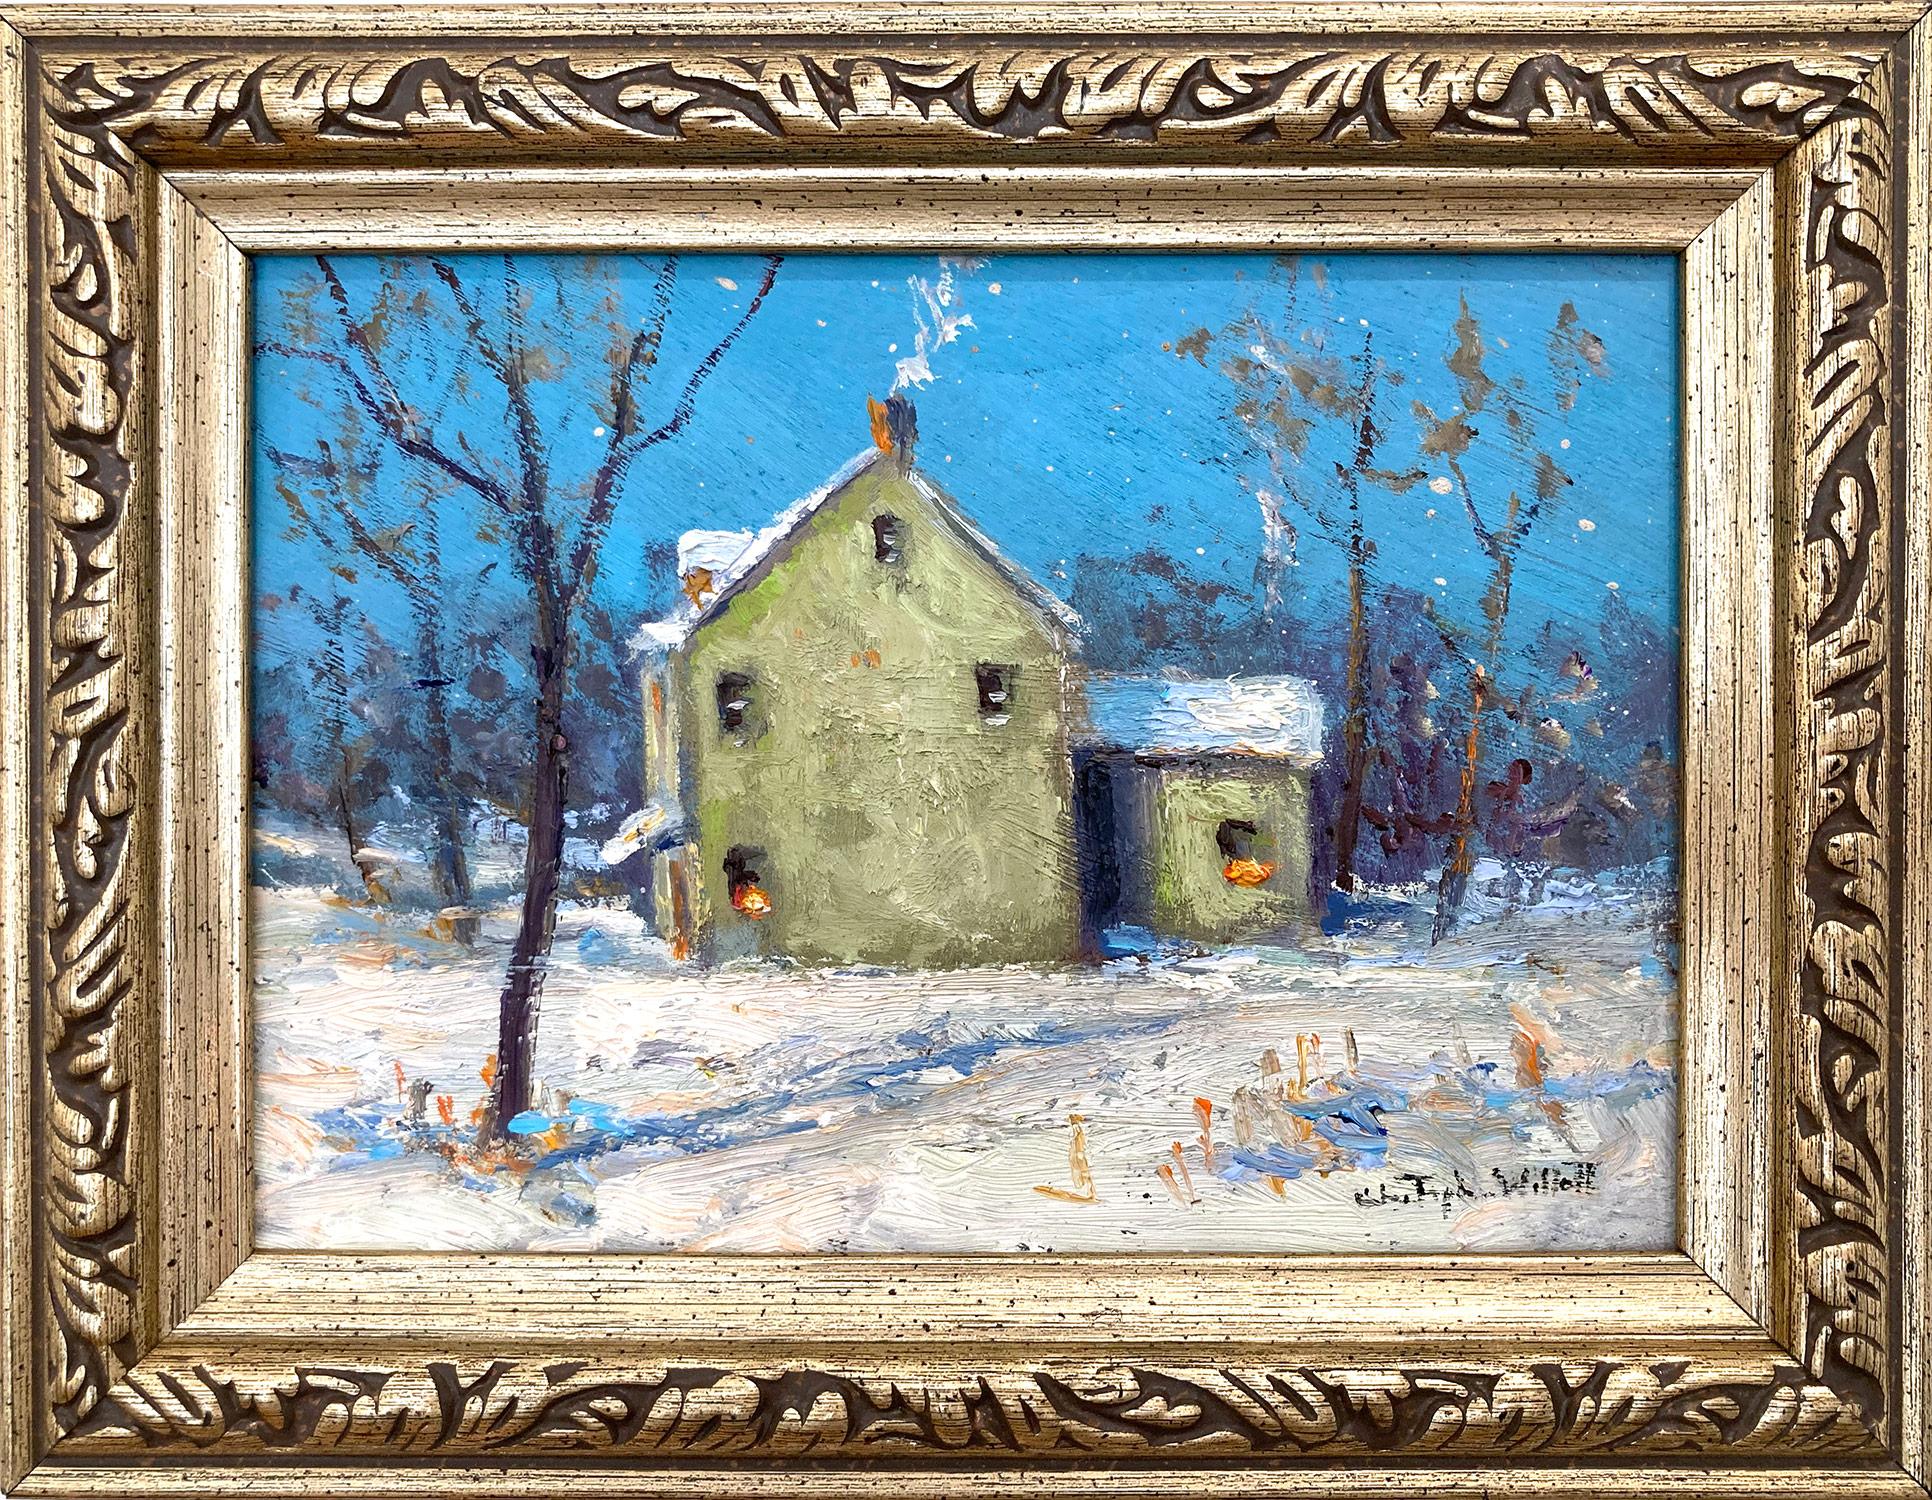 Christopher Willett Landscape Painting - "House in Buckingham" Bucks County PA, Pastoral Winter Landscape Oil Painting